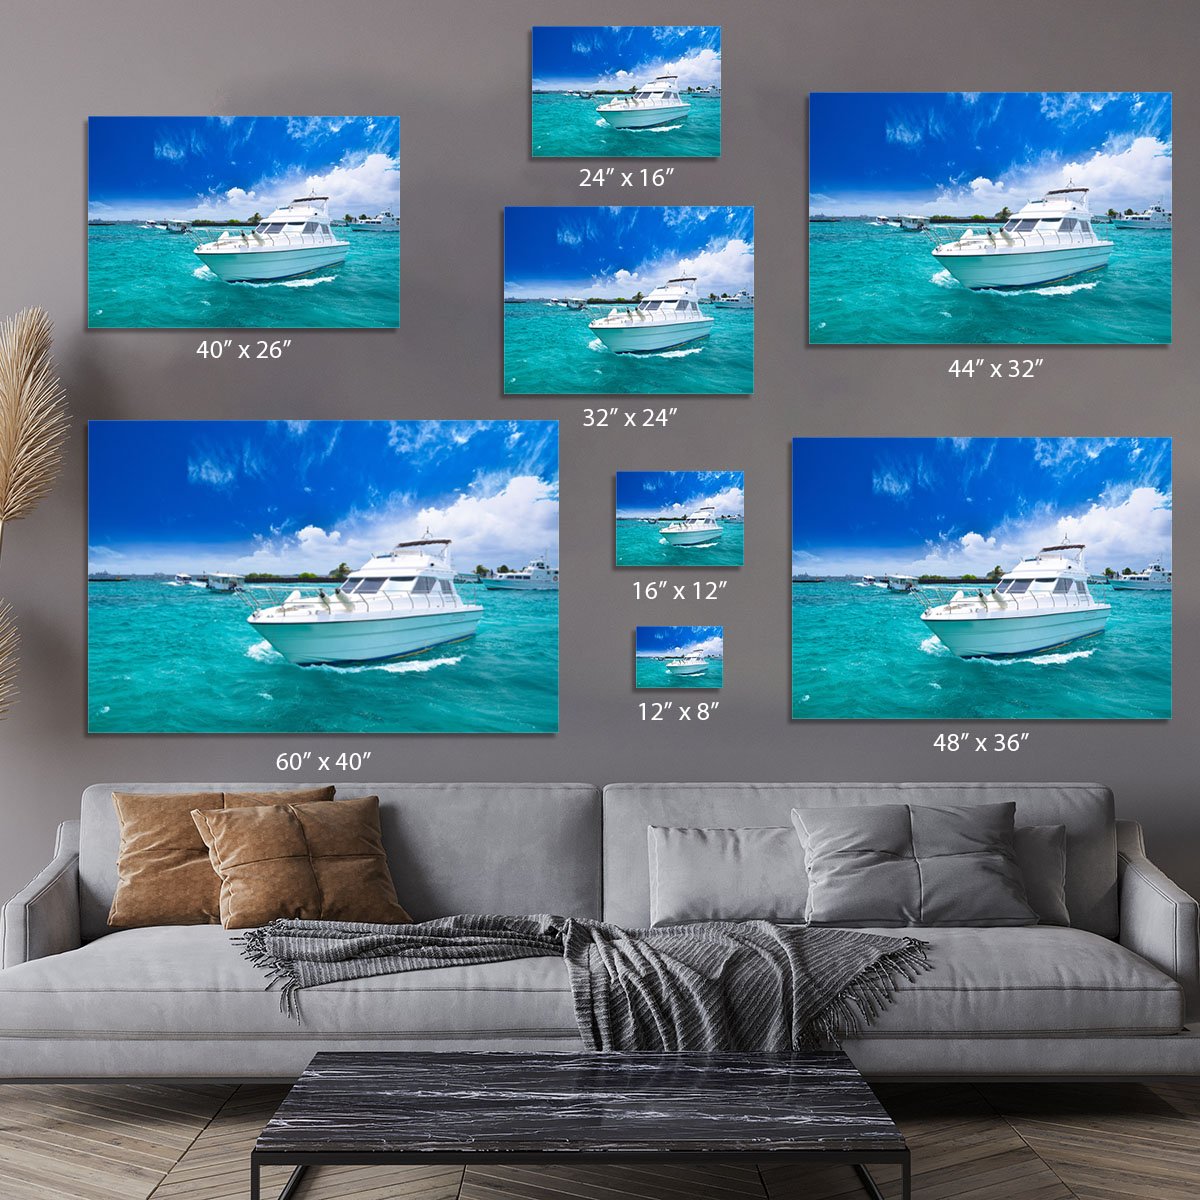 Luxury yatch in beautiful ocean Canvas Print or Poster